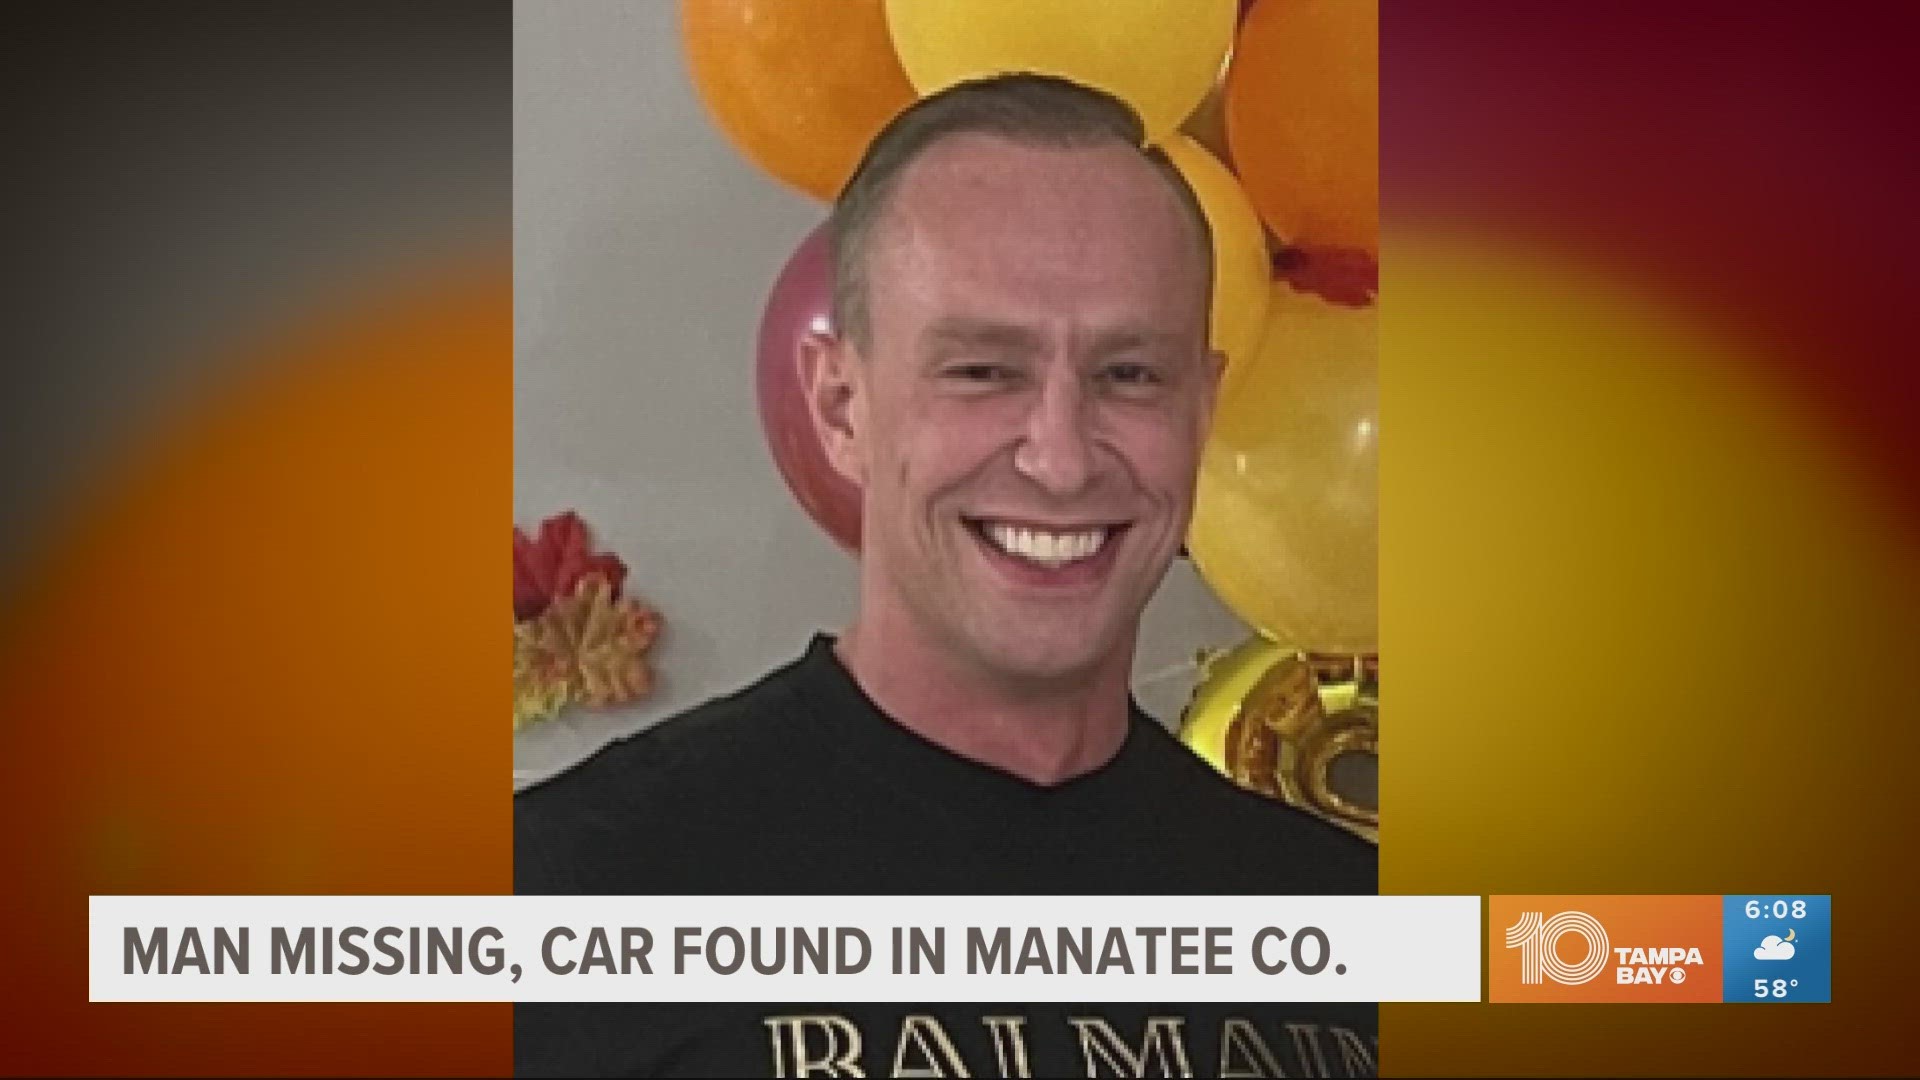 A man visiting Manatee county on business went missing just over a week ago. Deputies found his car and are ruling his disappearance suspicious.